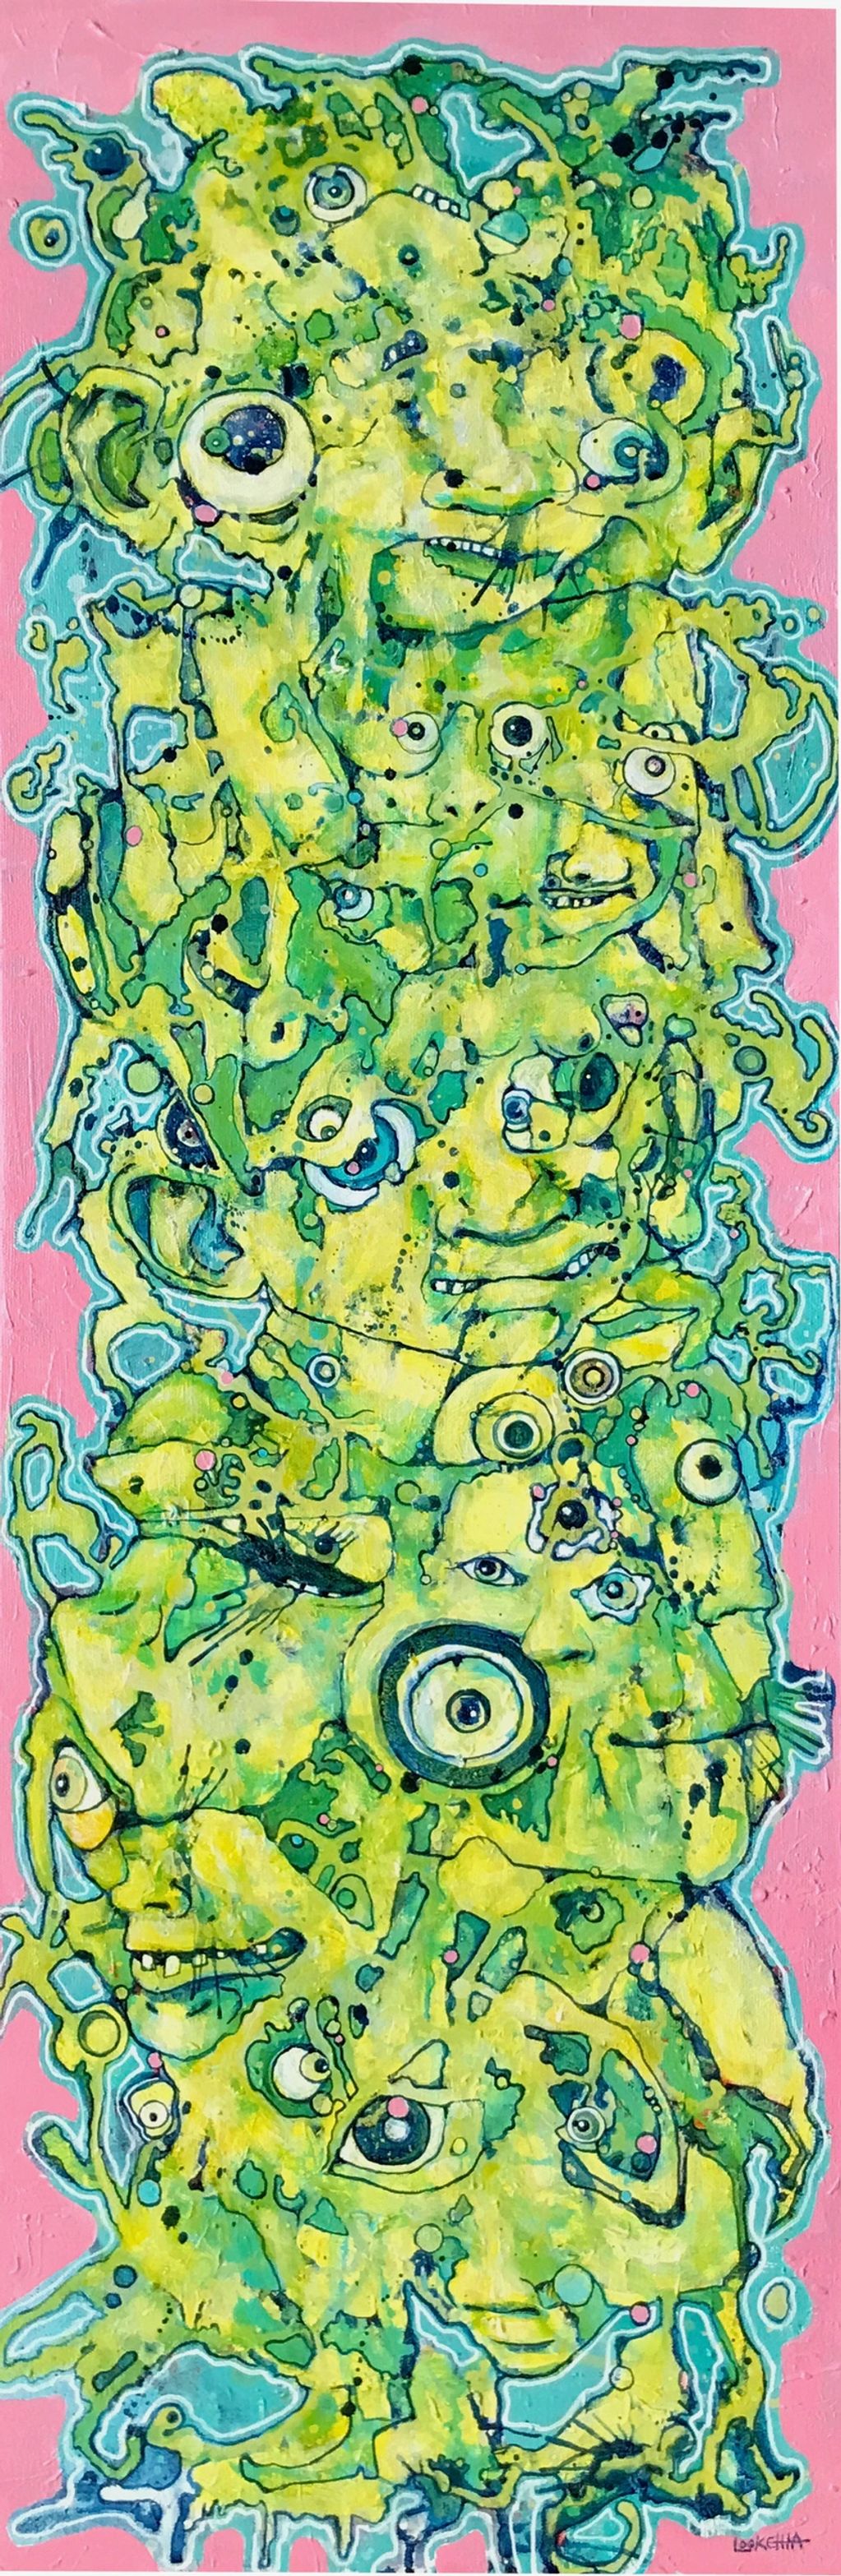 "handsome pickle"
acrylic on canvas
12"x 36"